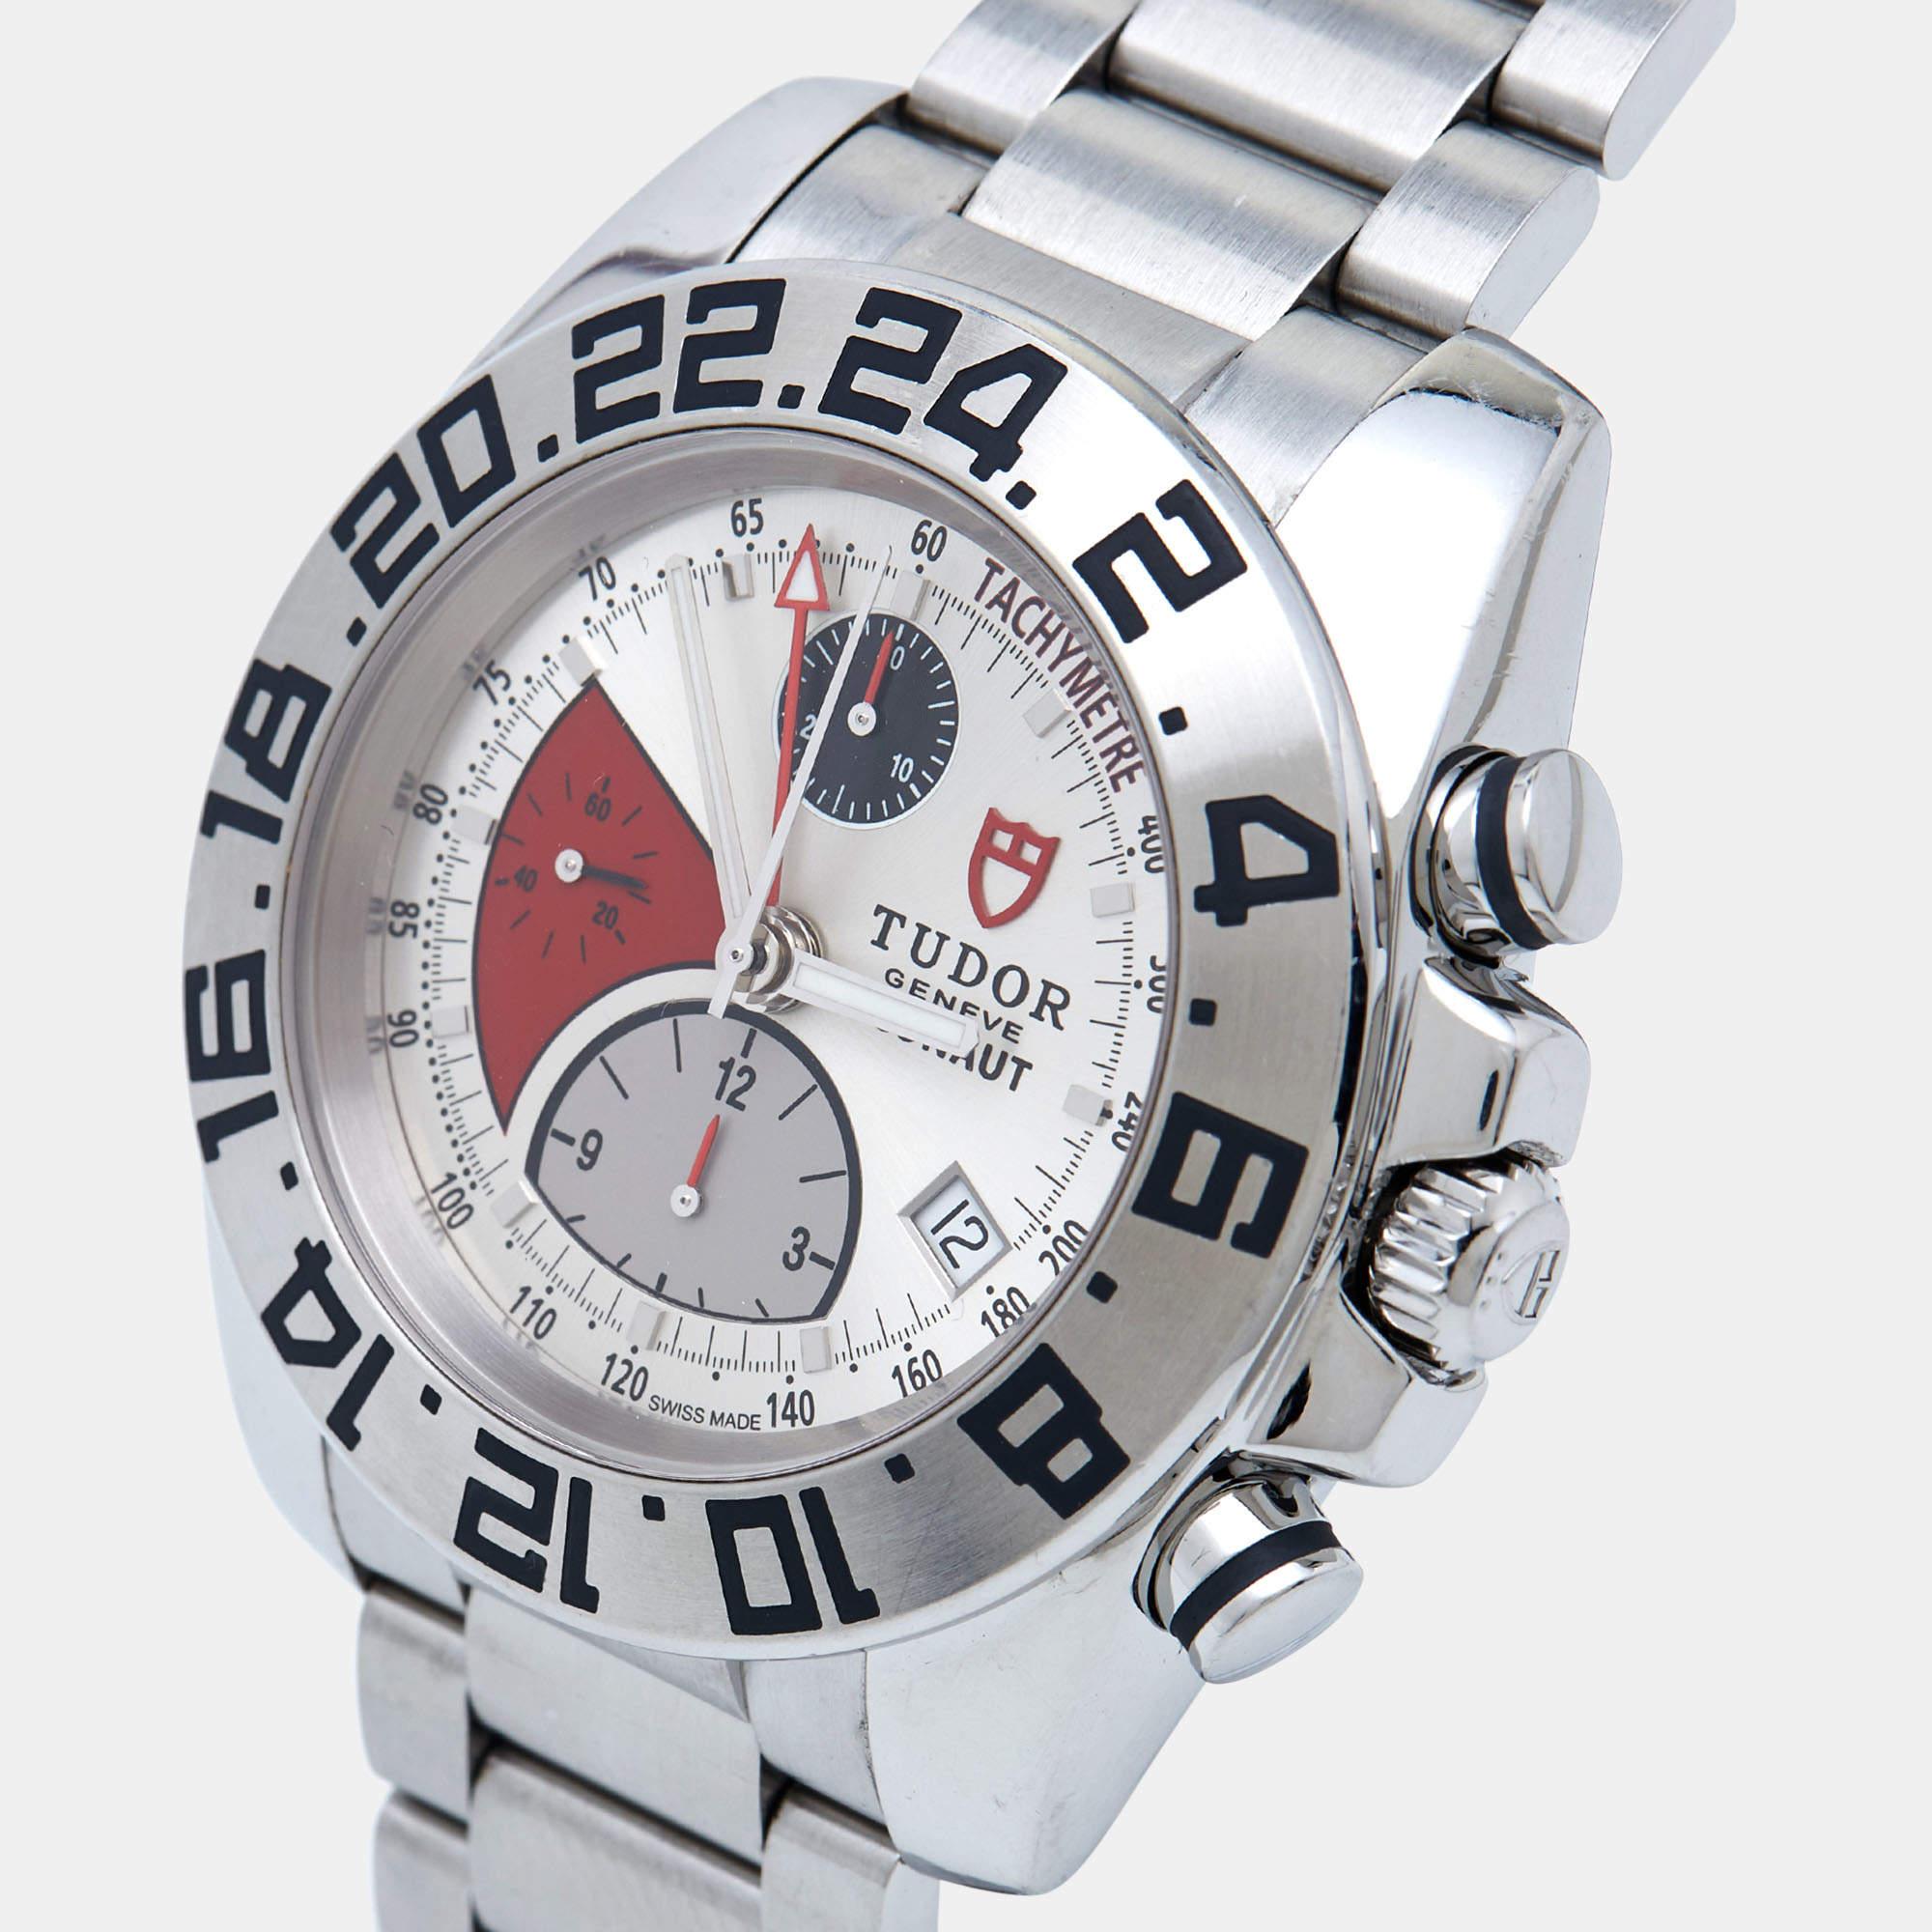 Tudor Silver Stainless Steel GMT Chronograph Iconaut Men's Wristwatch 44 mm 6